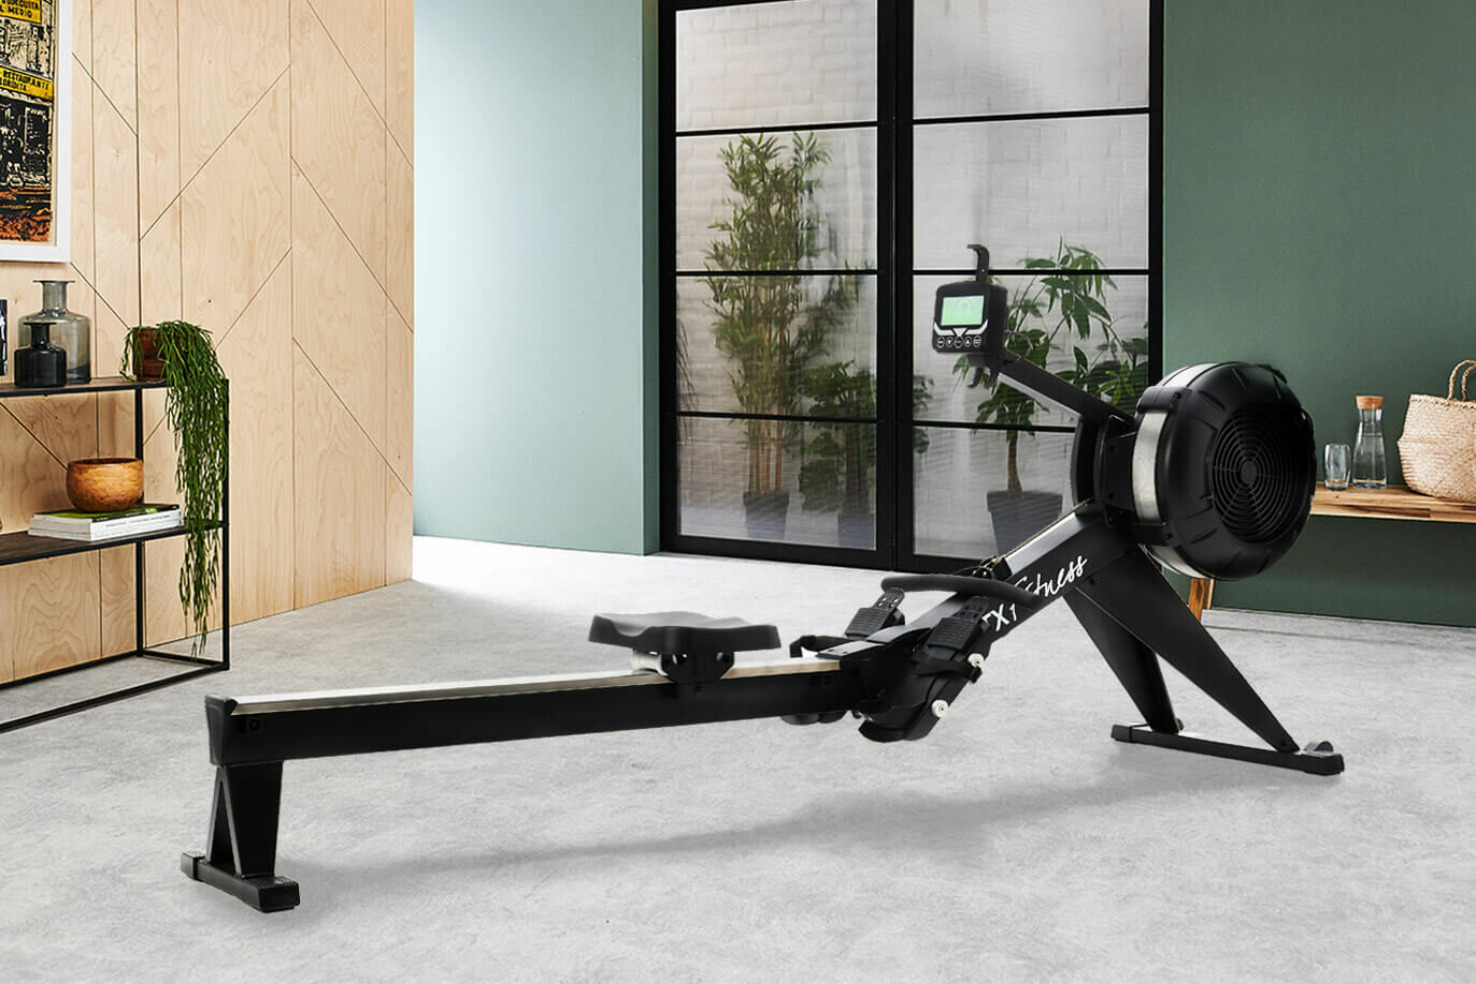 9 best rowing machines 2022: tested Concept2 Hydrow and